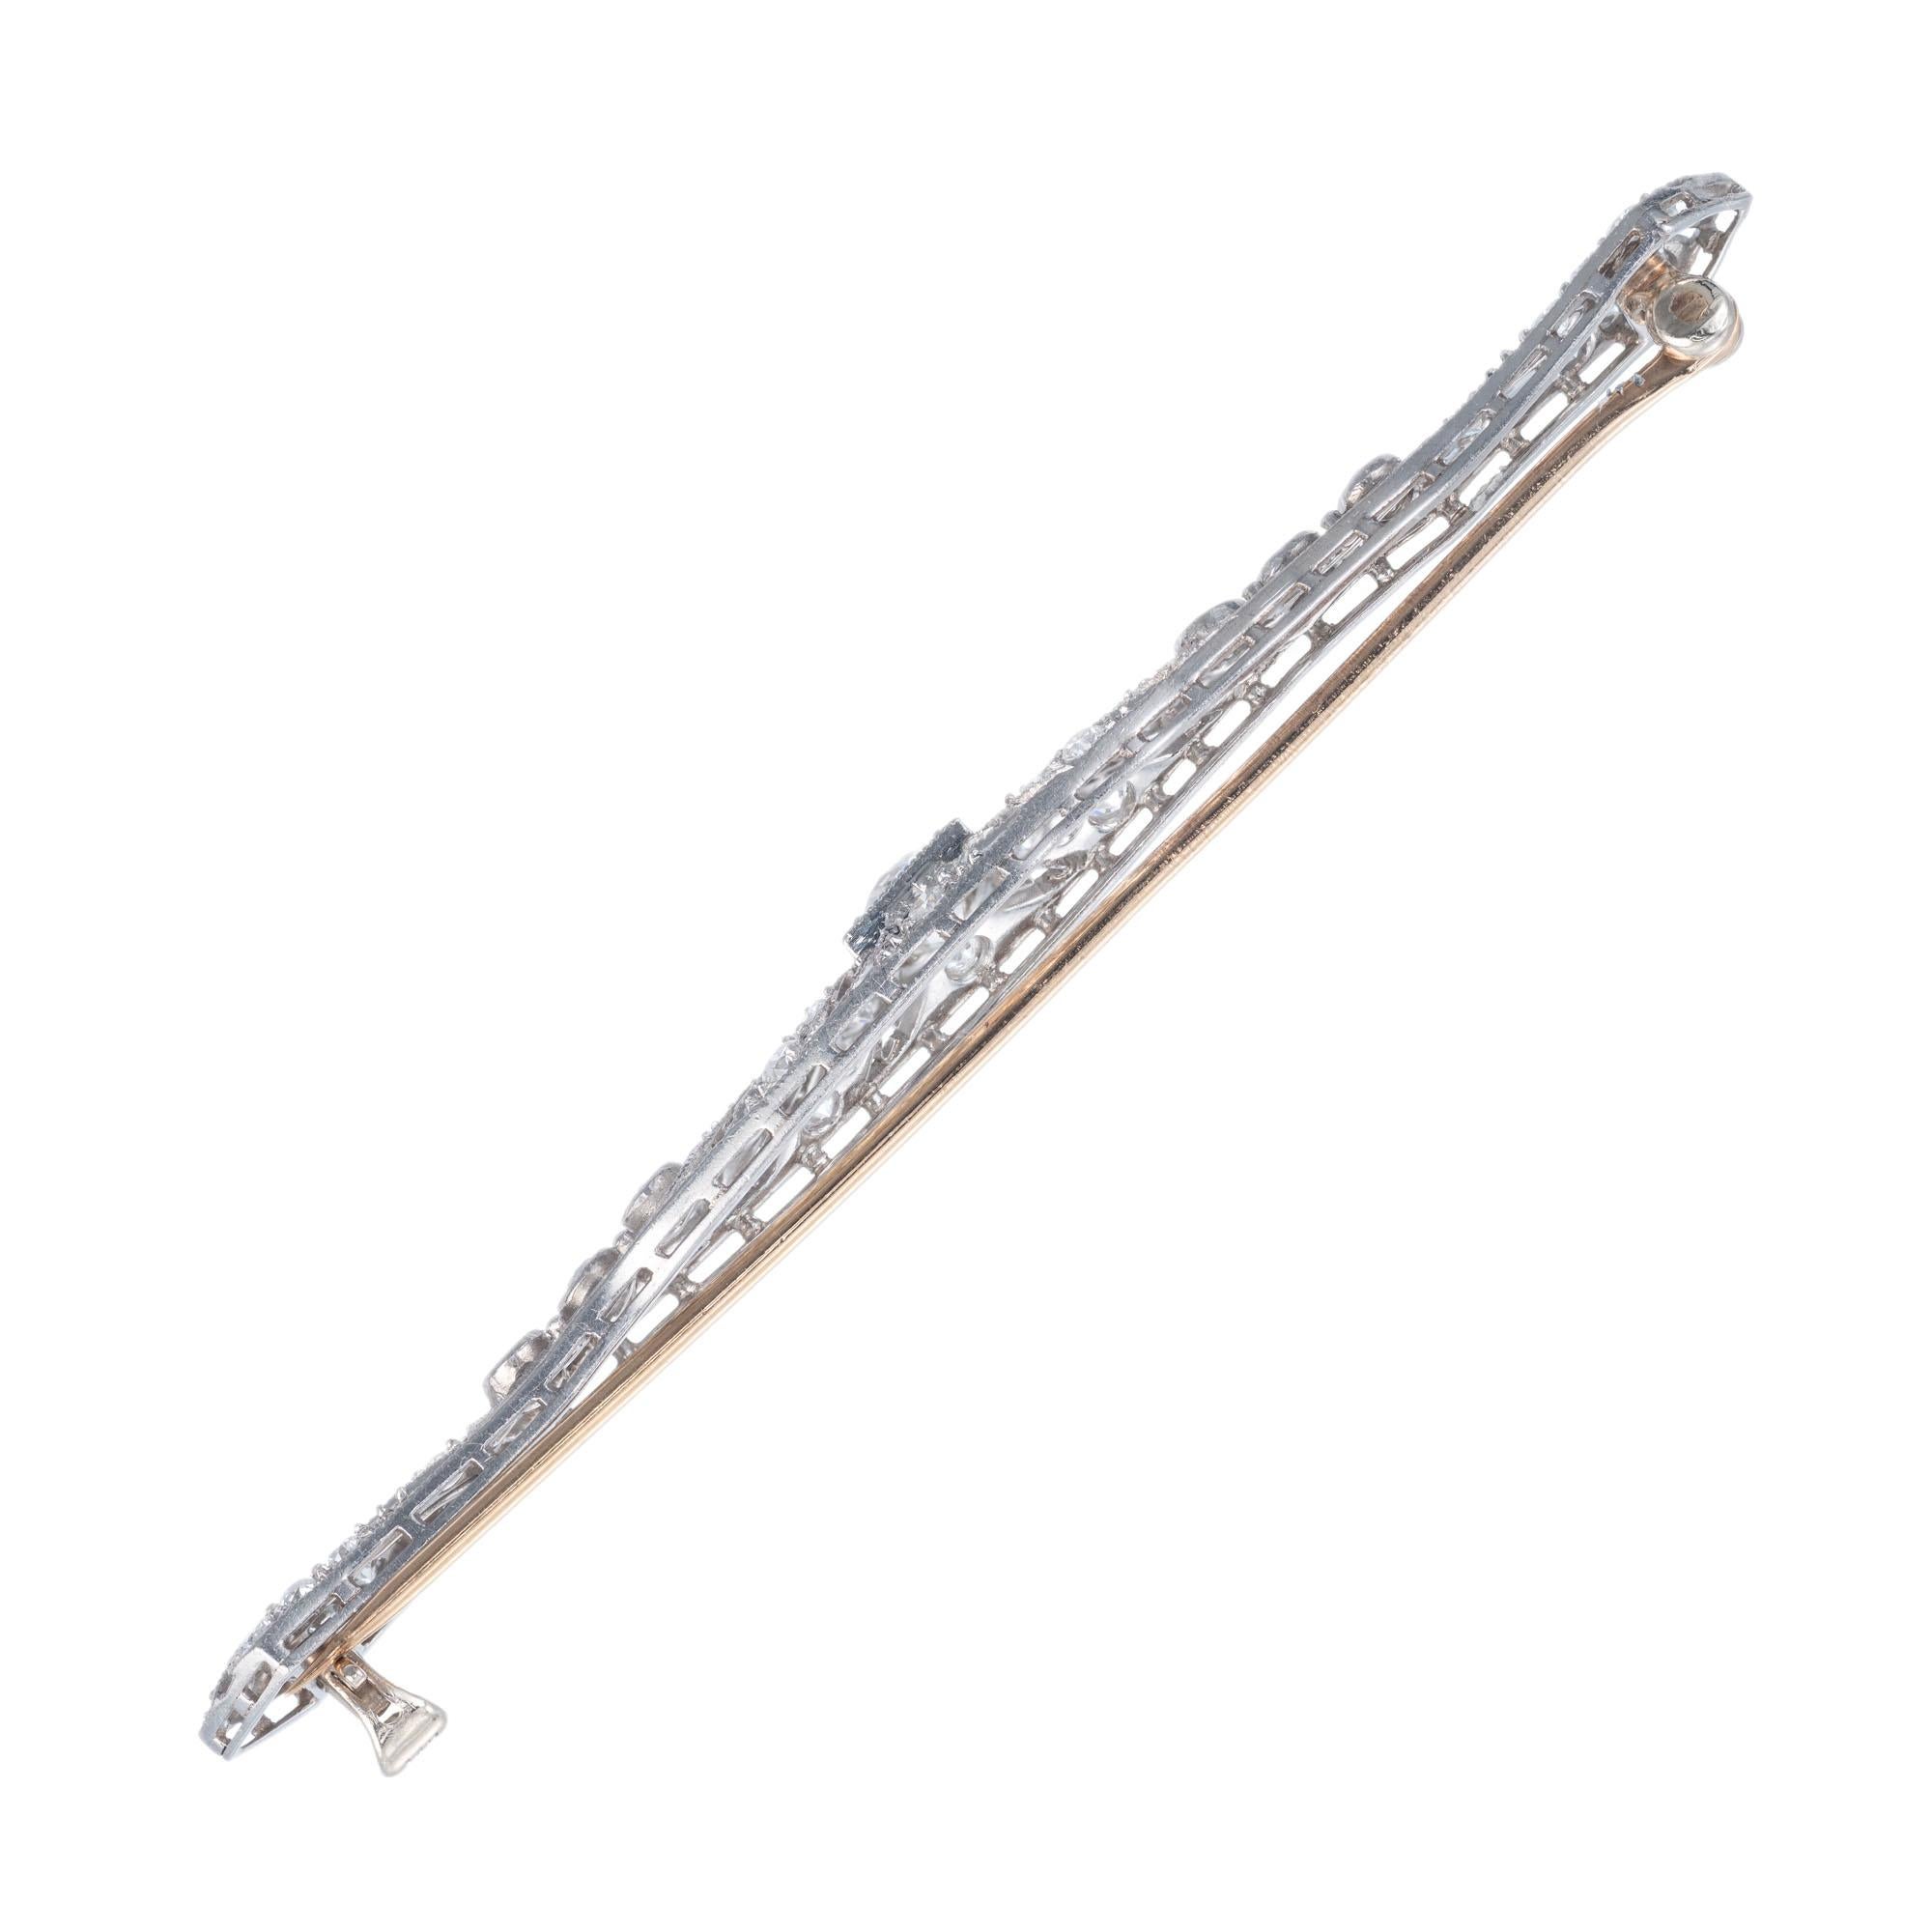 1925 Art Deco Platinum filigree bar brooch. Set with an old European cut center diamond and old European cut accent diamonds. 

1 center cut diamond old European cut diamond .70cts. H color, SI1 clarity
6 side diamonds approx. total weight .06cts
32